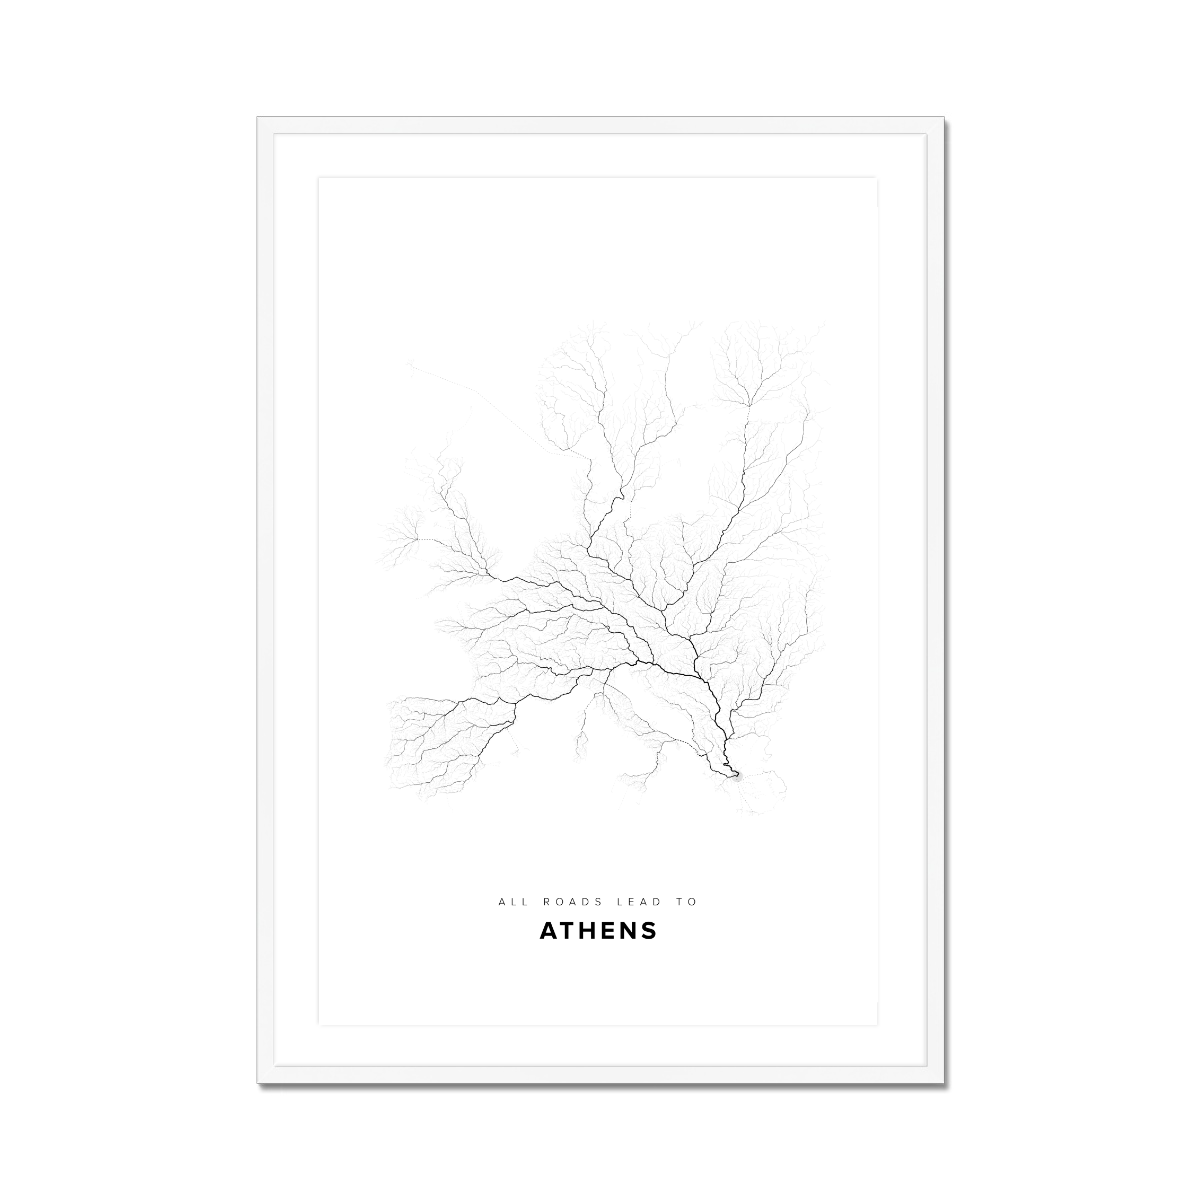 All roads lead to Athens (Greece) Fine Art Map Print